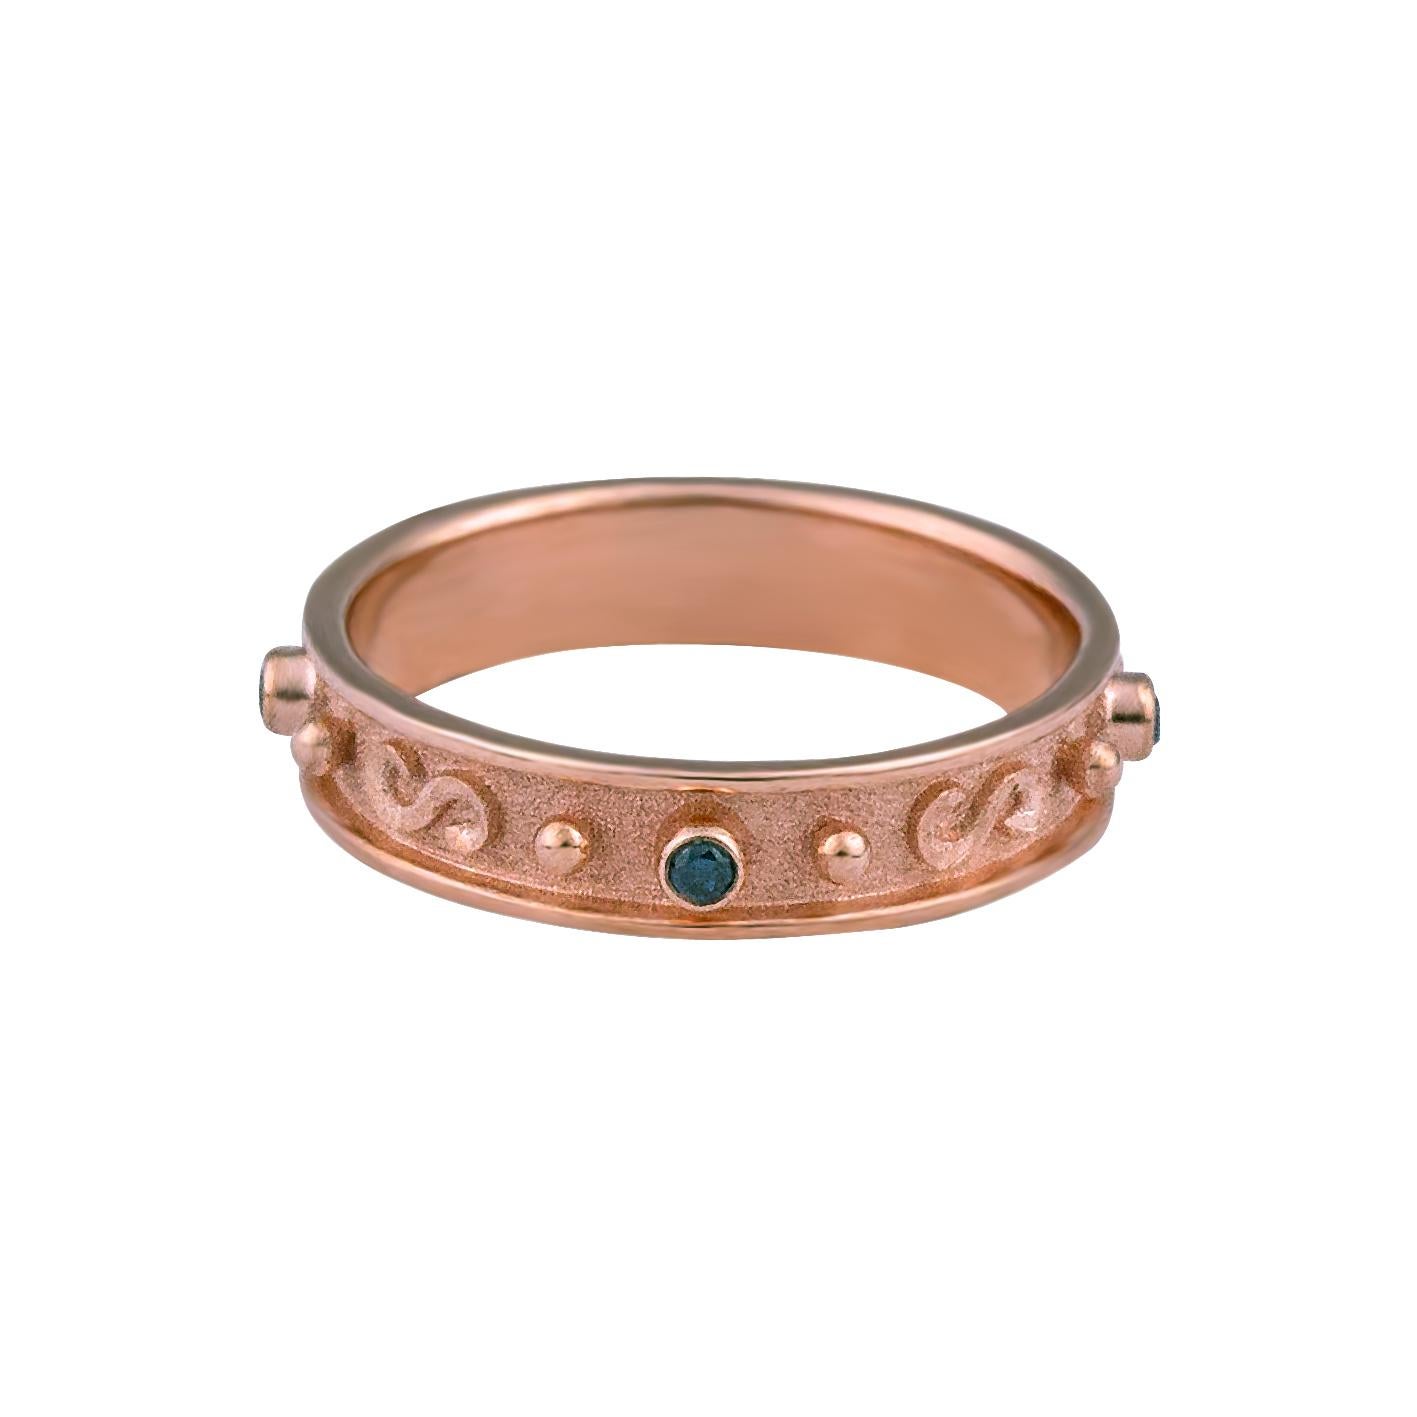 This S.Georgios design ring is handmade from solid 18 Karat Rose Gold and is microscopically decorated with granulation work - rose gold beads and wires - all the way around. This beautiful band features 4 Brilliant cut Blue Diamonds total weight of